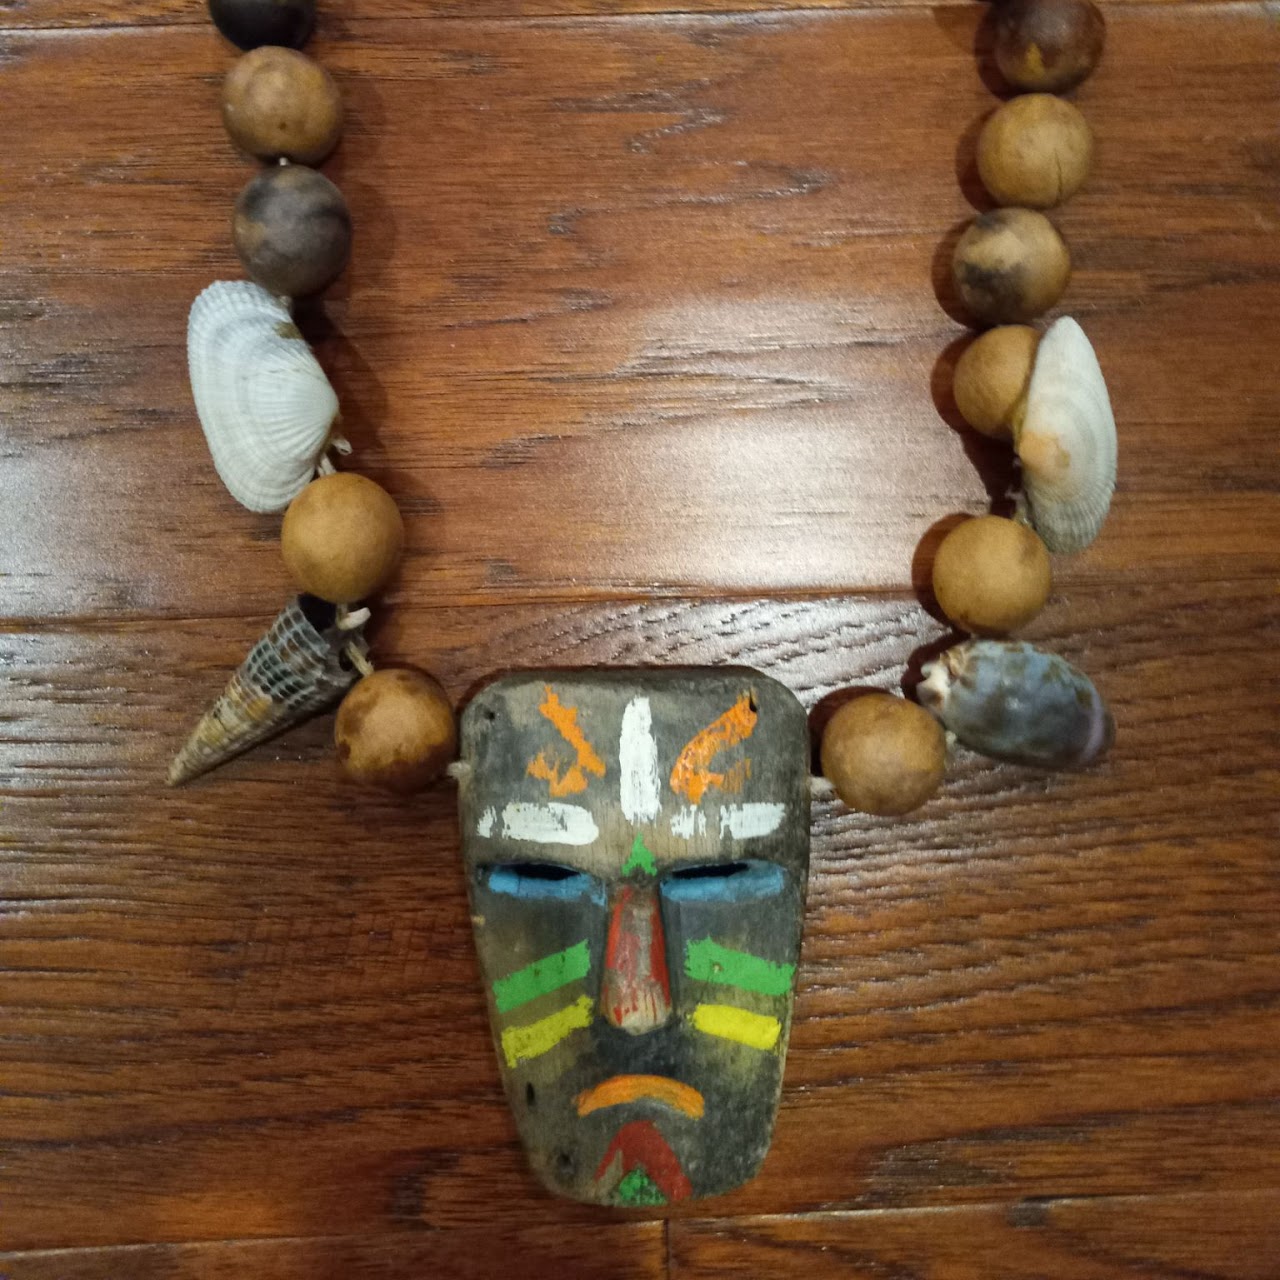 Borneo immunity necklace. For contestants, nothing was more coveted or powerful than the immunity necklace, ensuring that they couldn't be voted out at the next tribal council.